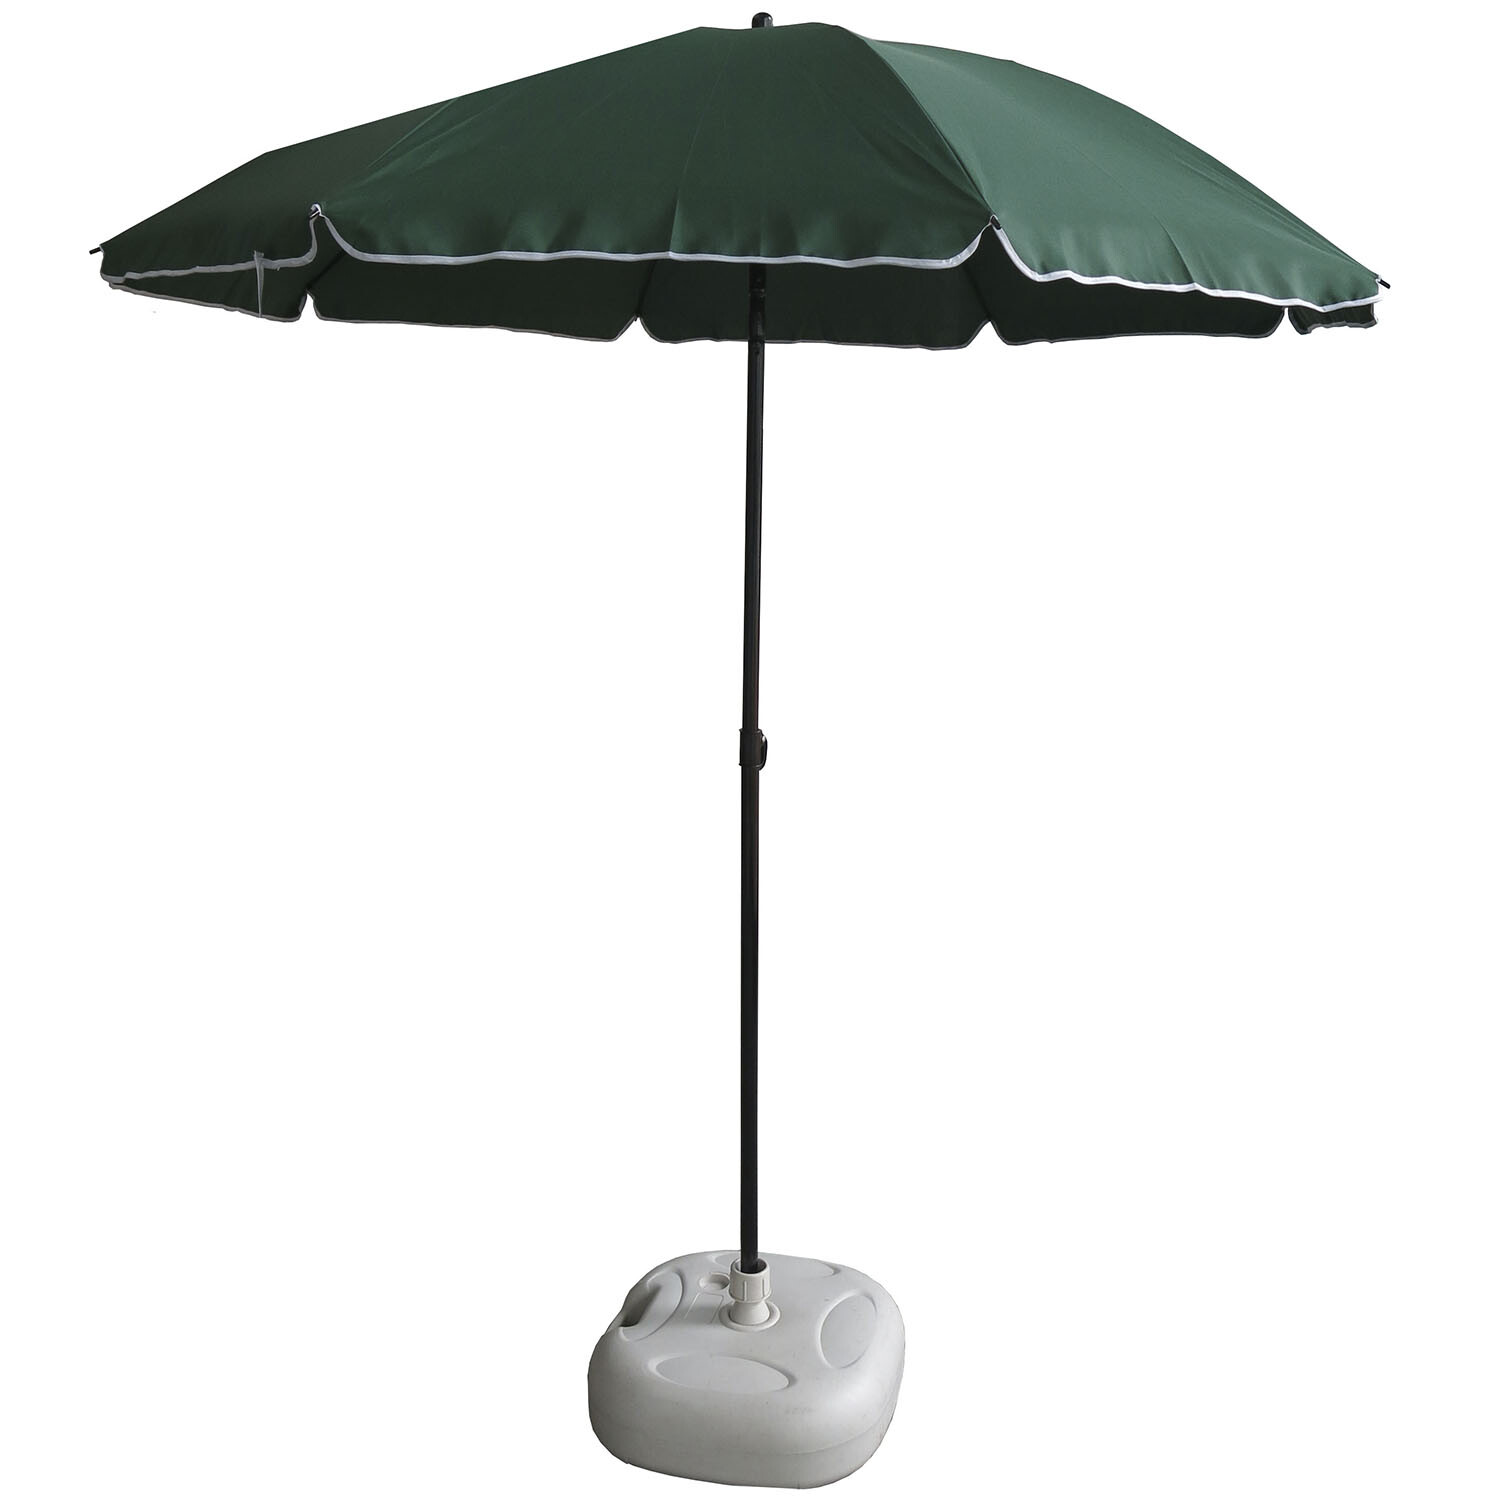 Single Beach Parasol 1.8m in Assorted styles Image 1